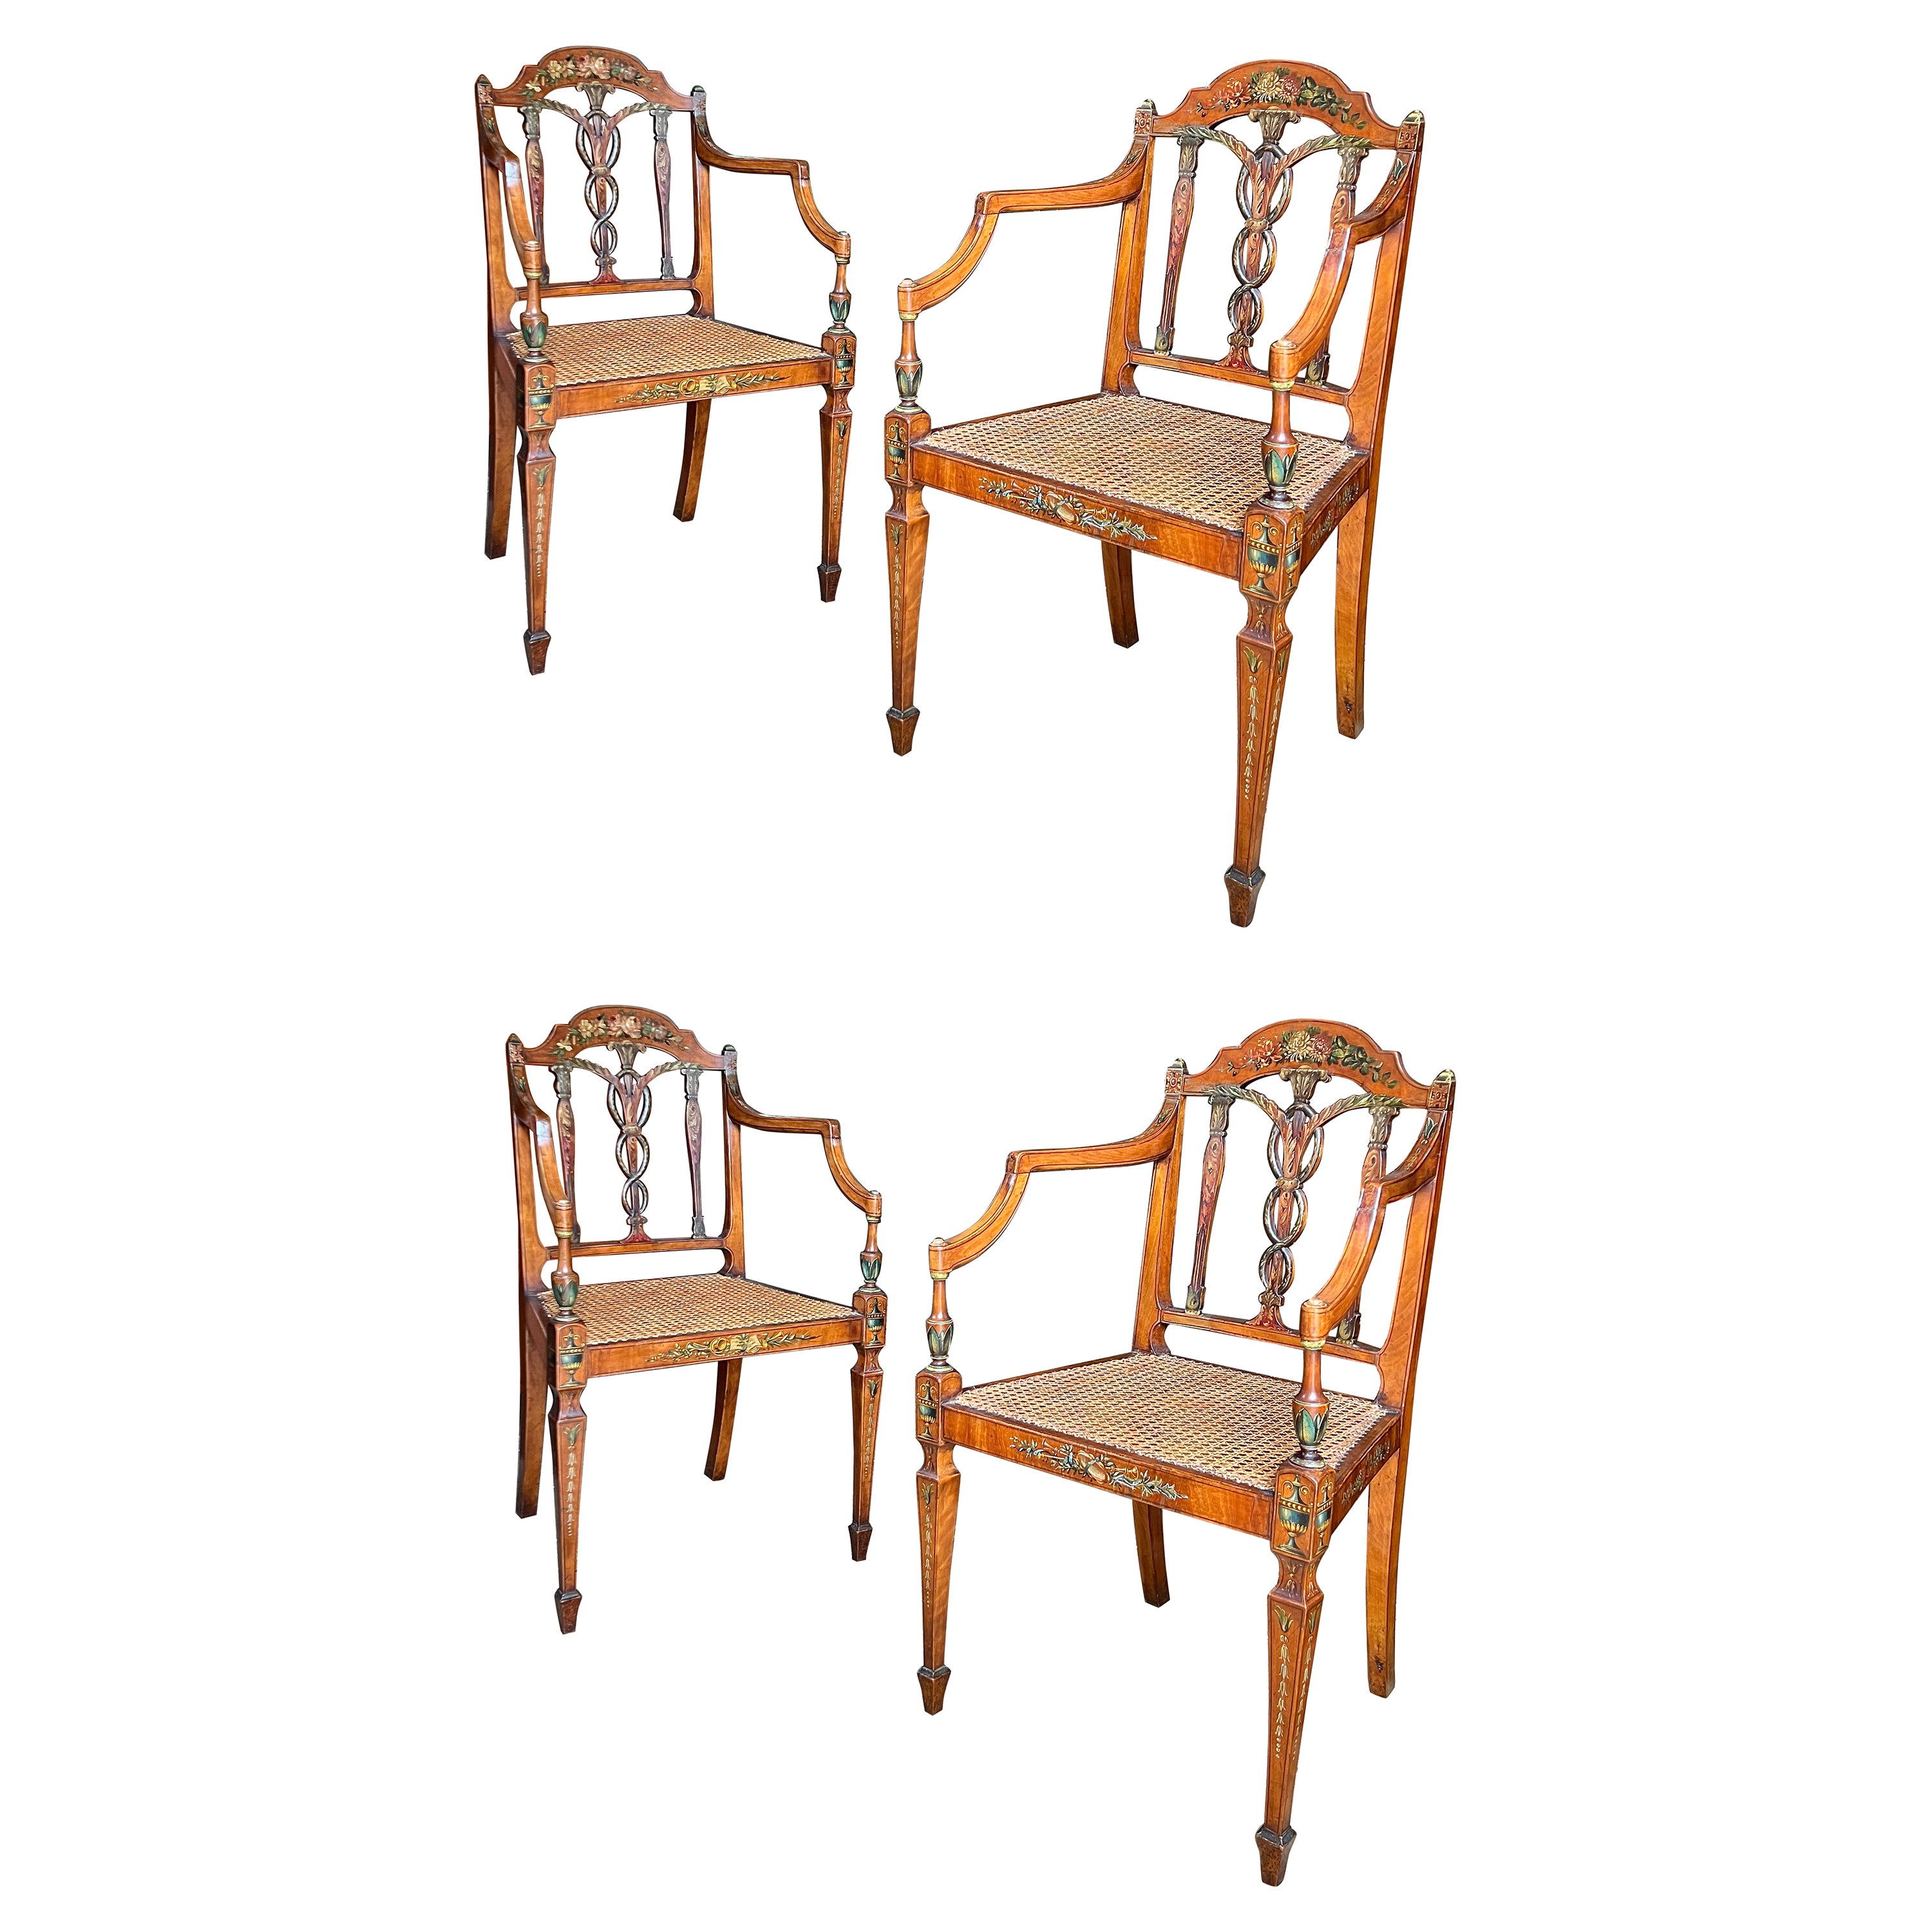 Set of Four 18th Century Satinwood Painted Armchairs - Seddon, Sons & Shackleton For Sale 9